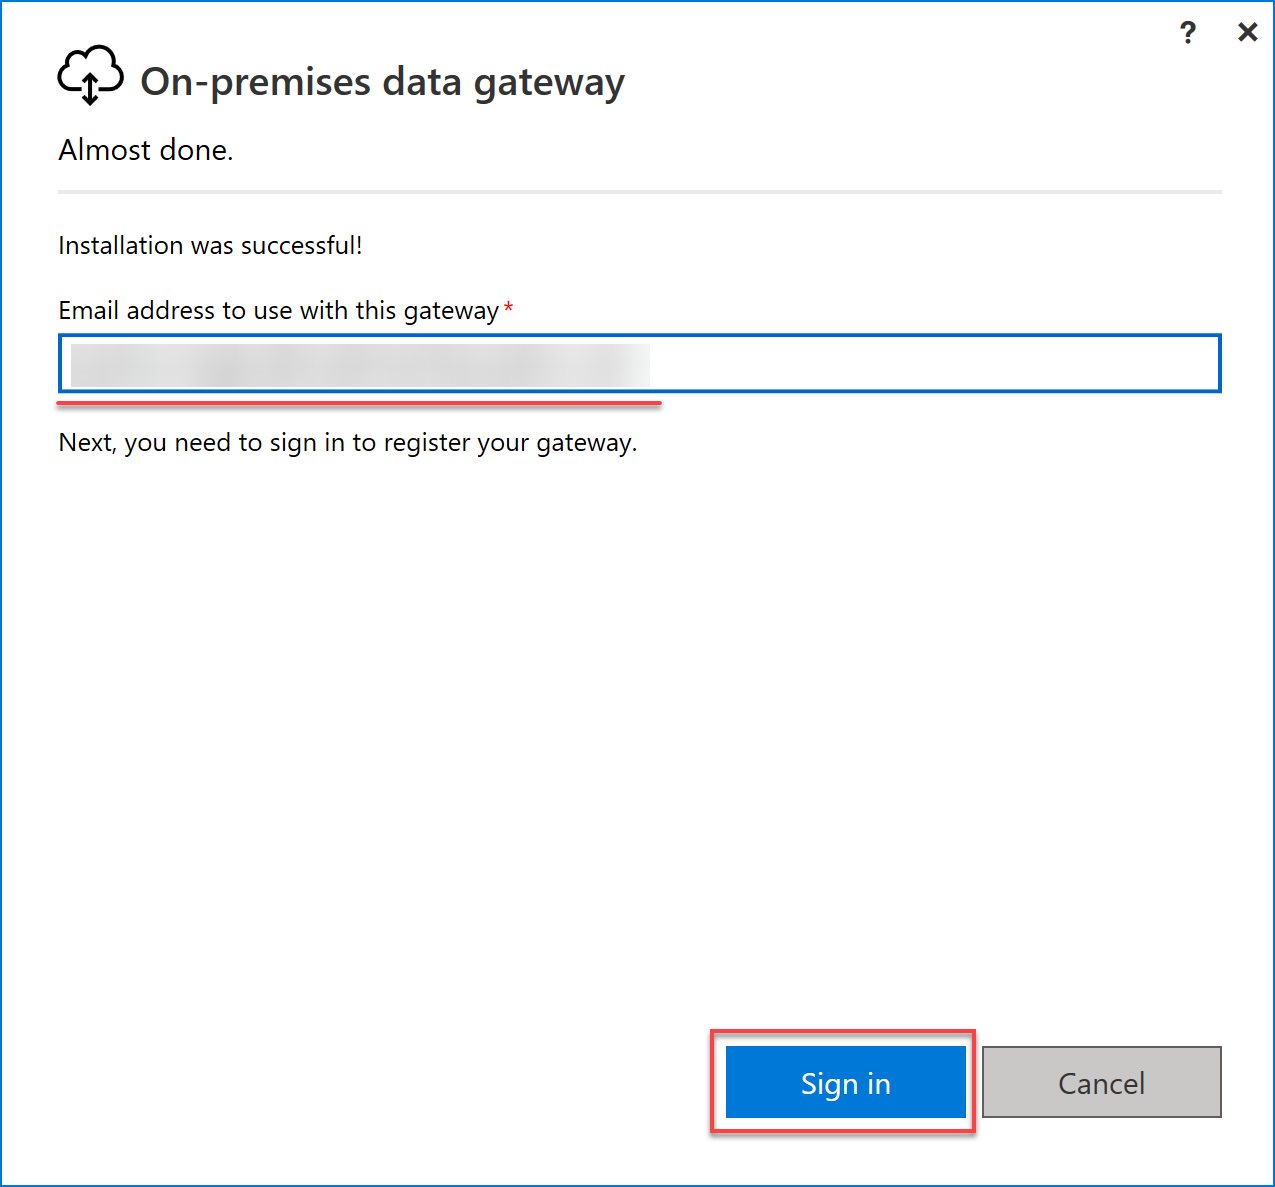 Providing an email address to use with the on-premises data gateway